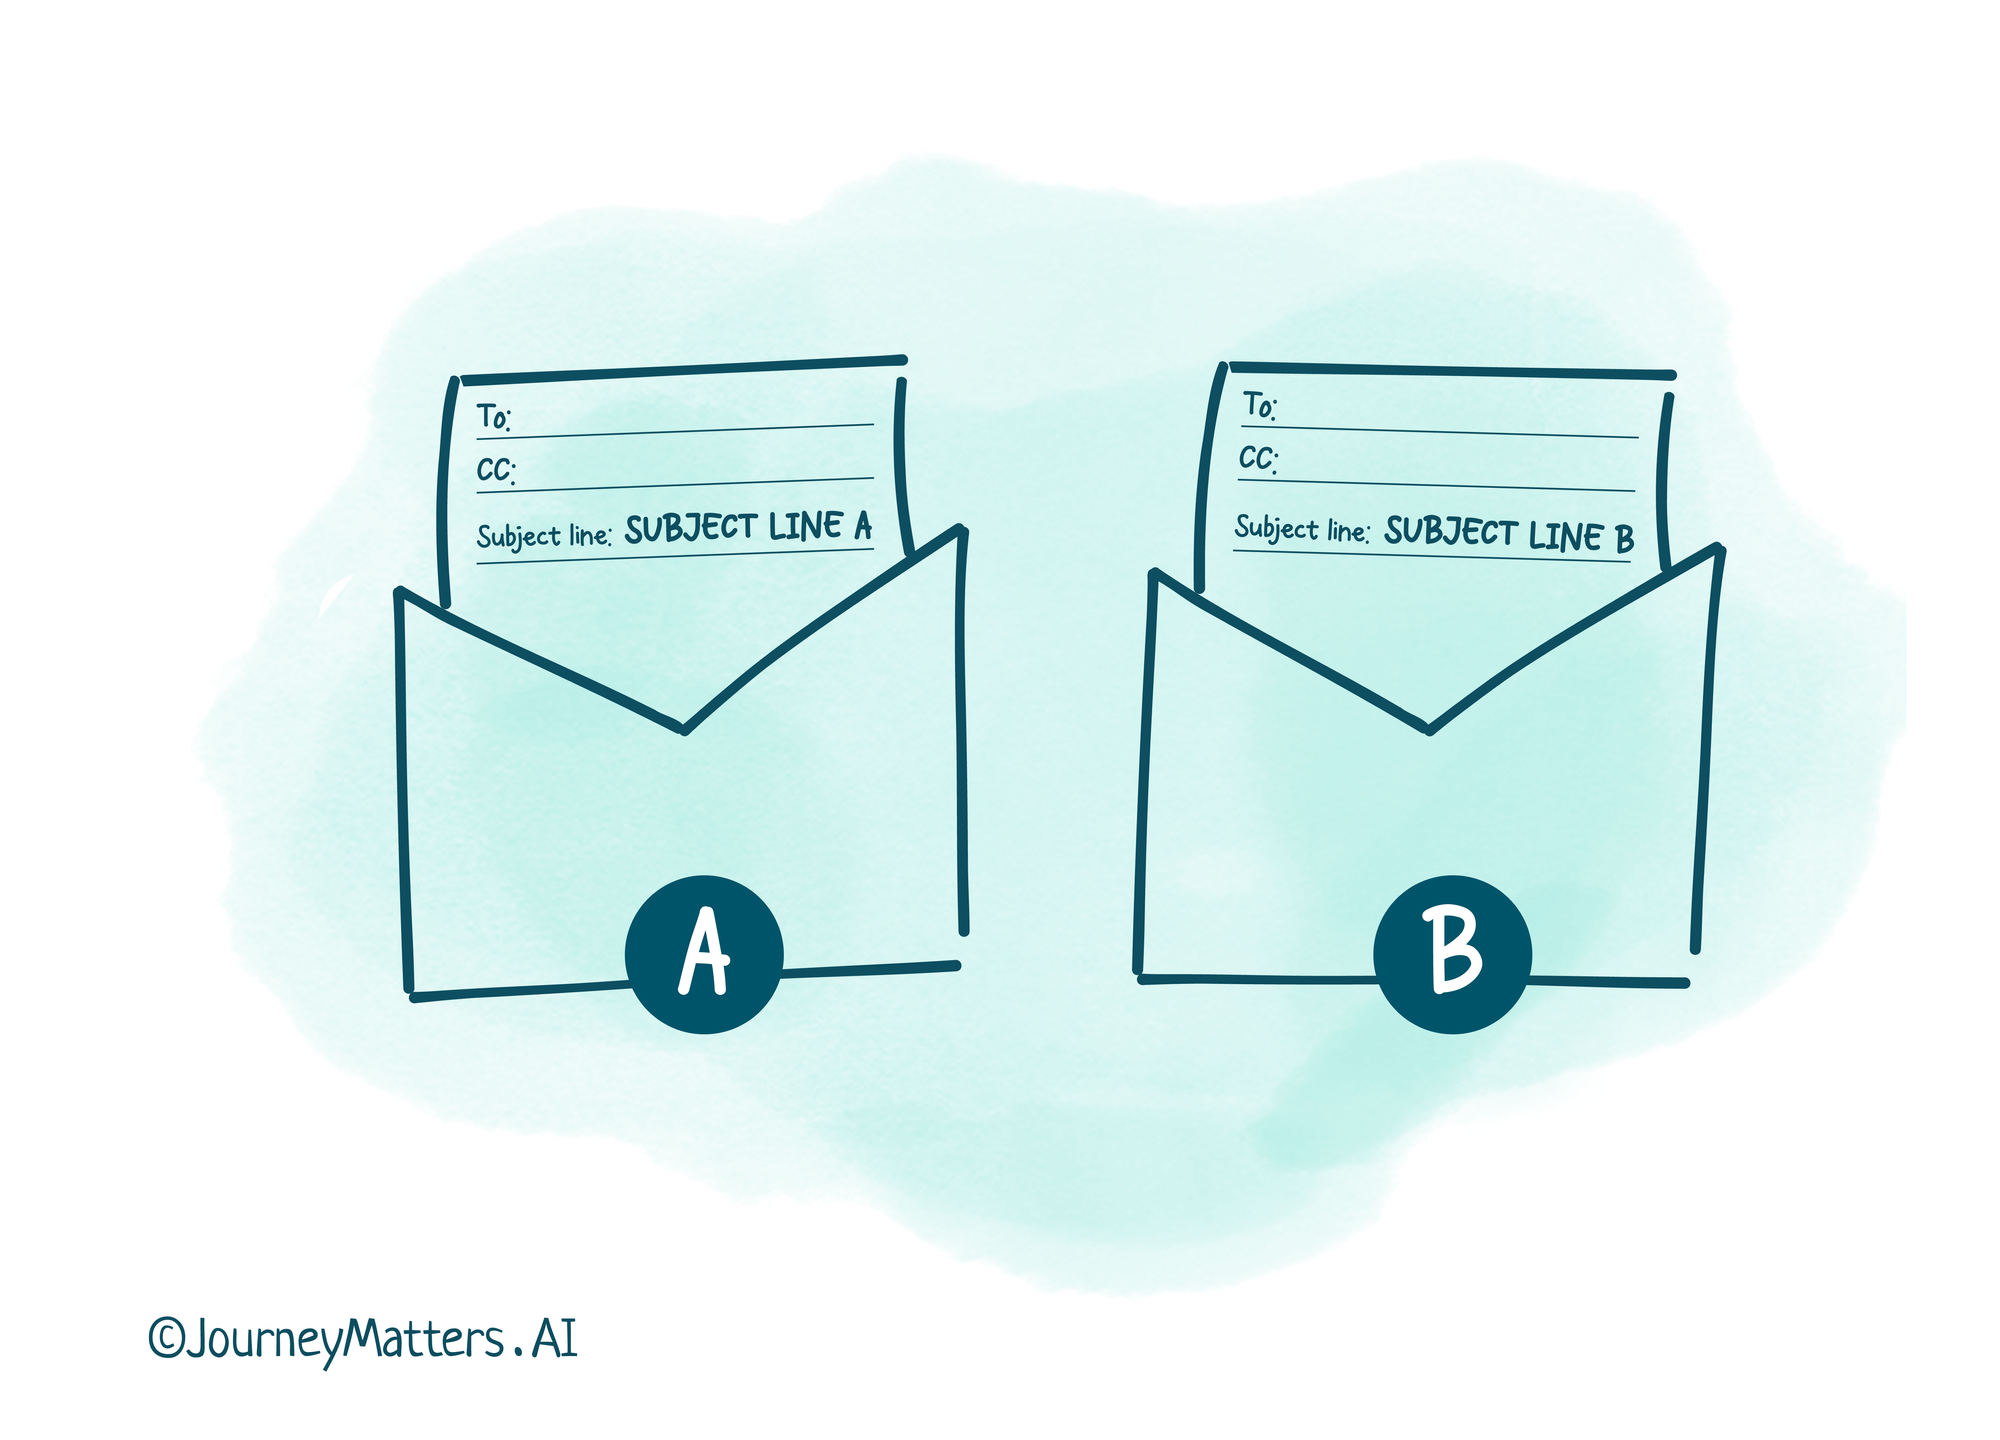 AMarketers use two versions of an email with different subject lines to determine which subject line is more effective.